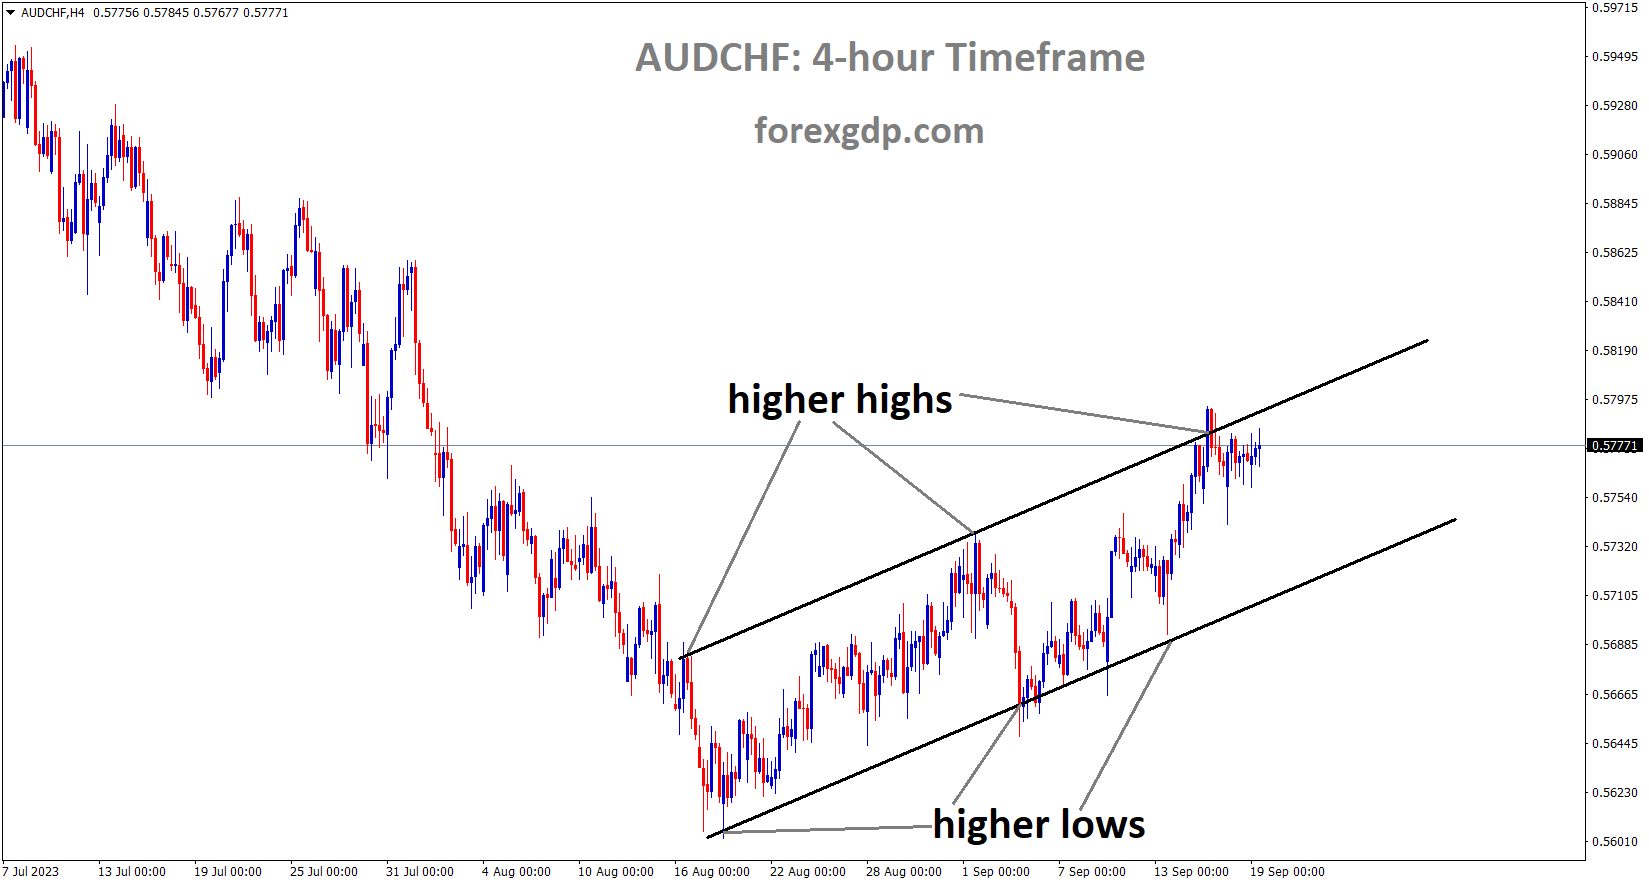 AUDCHF is moving in an Ascending channel and the market has reached the higher high area of the channel